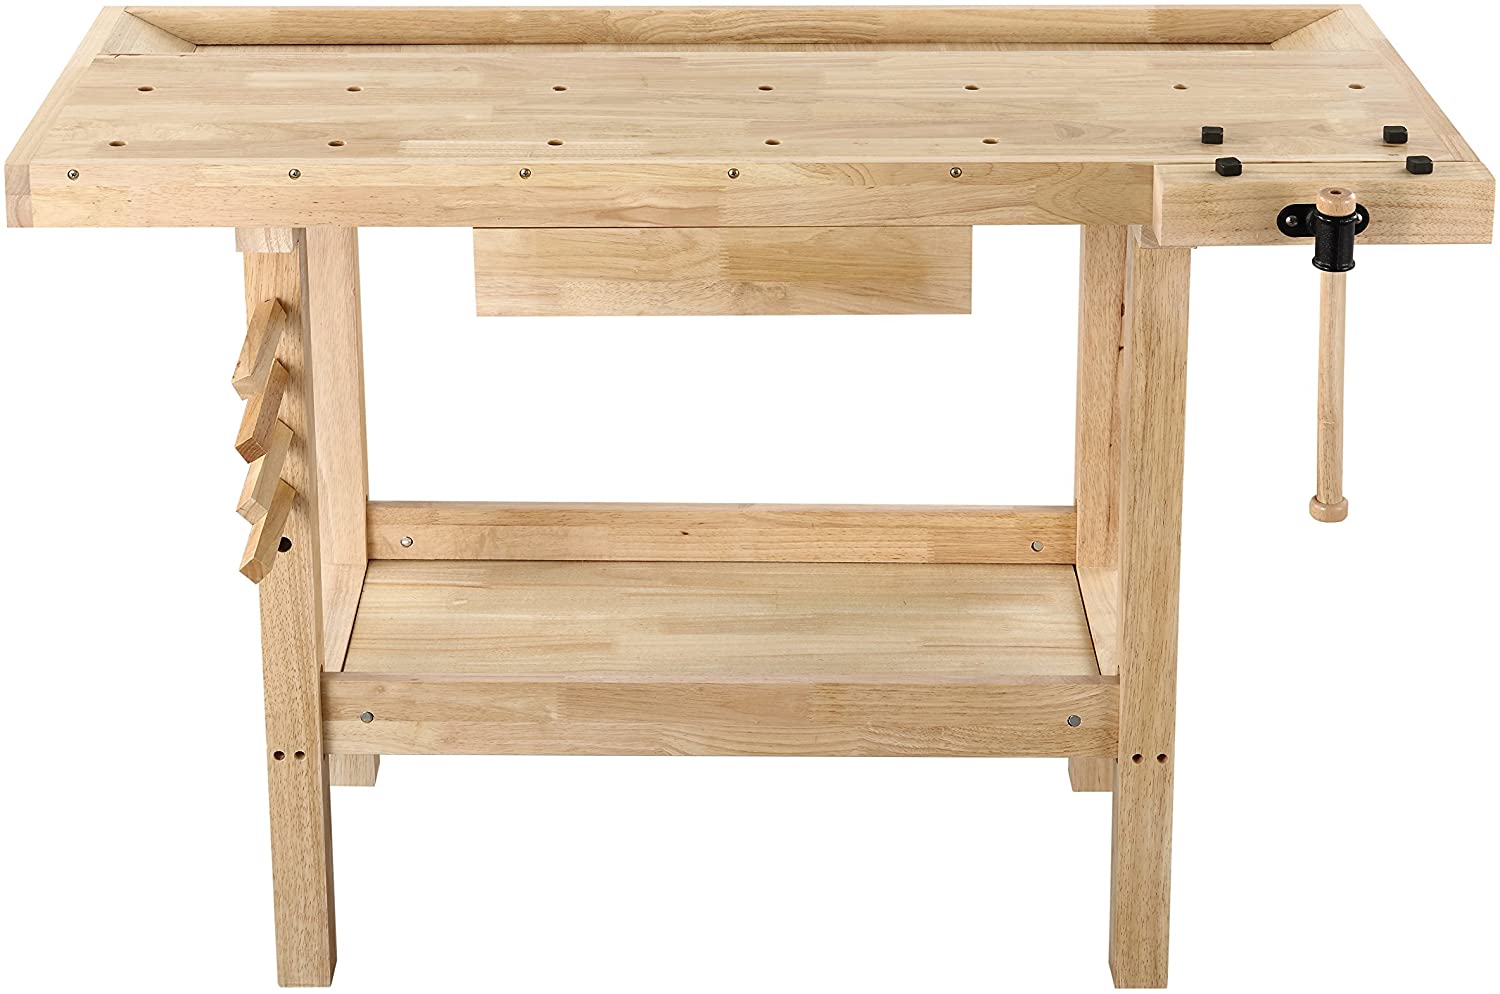 <strong>8. Olympia Tools 84-906 Hard Wood Workbench</strong>